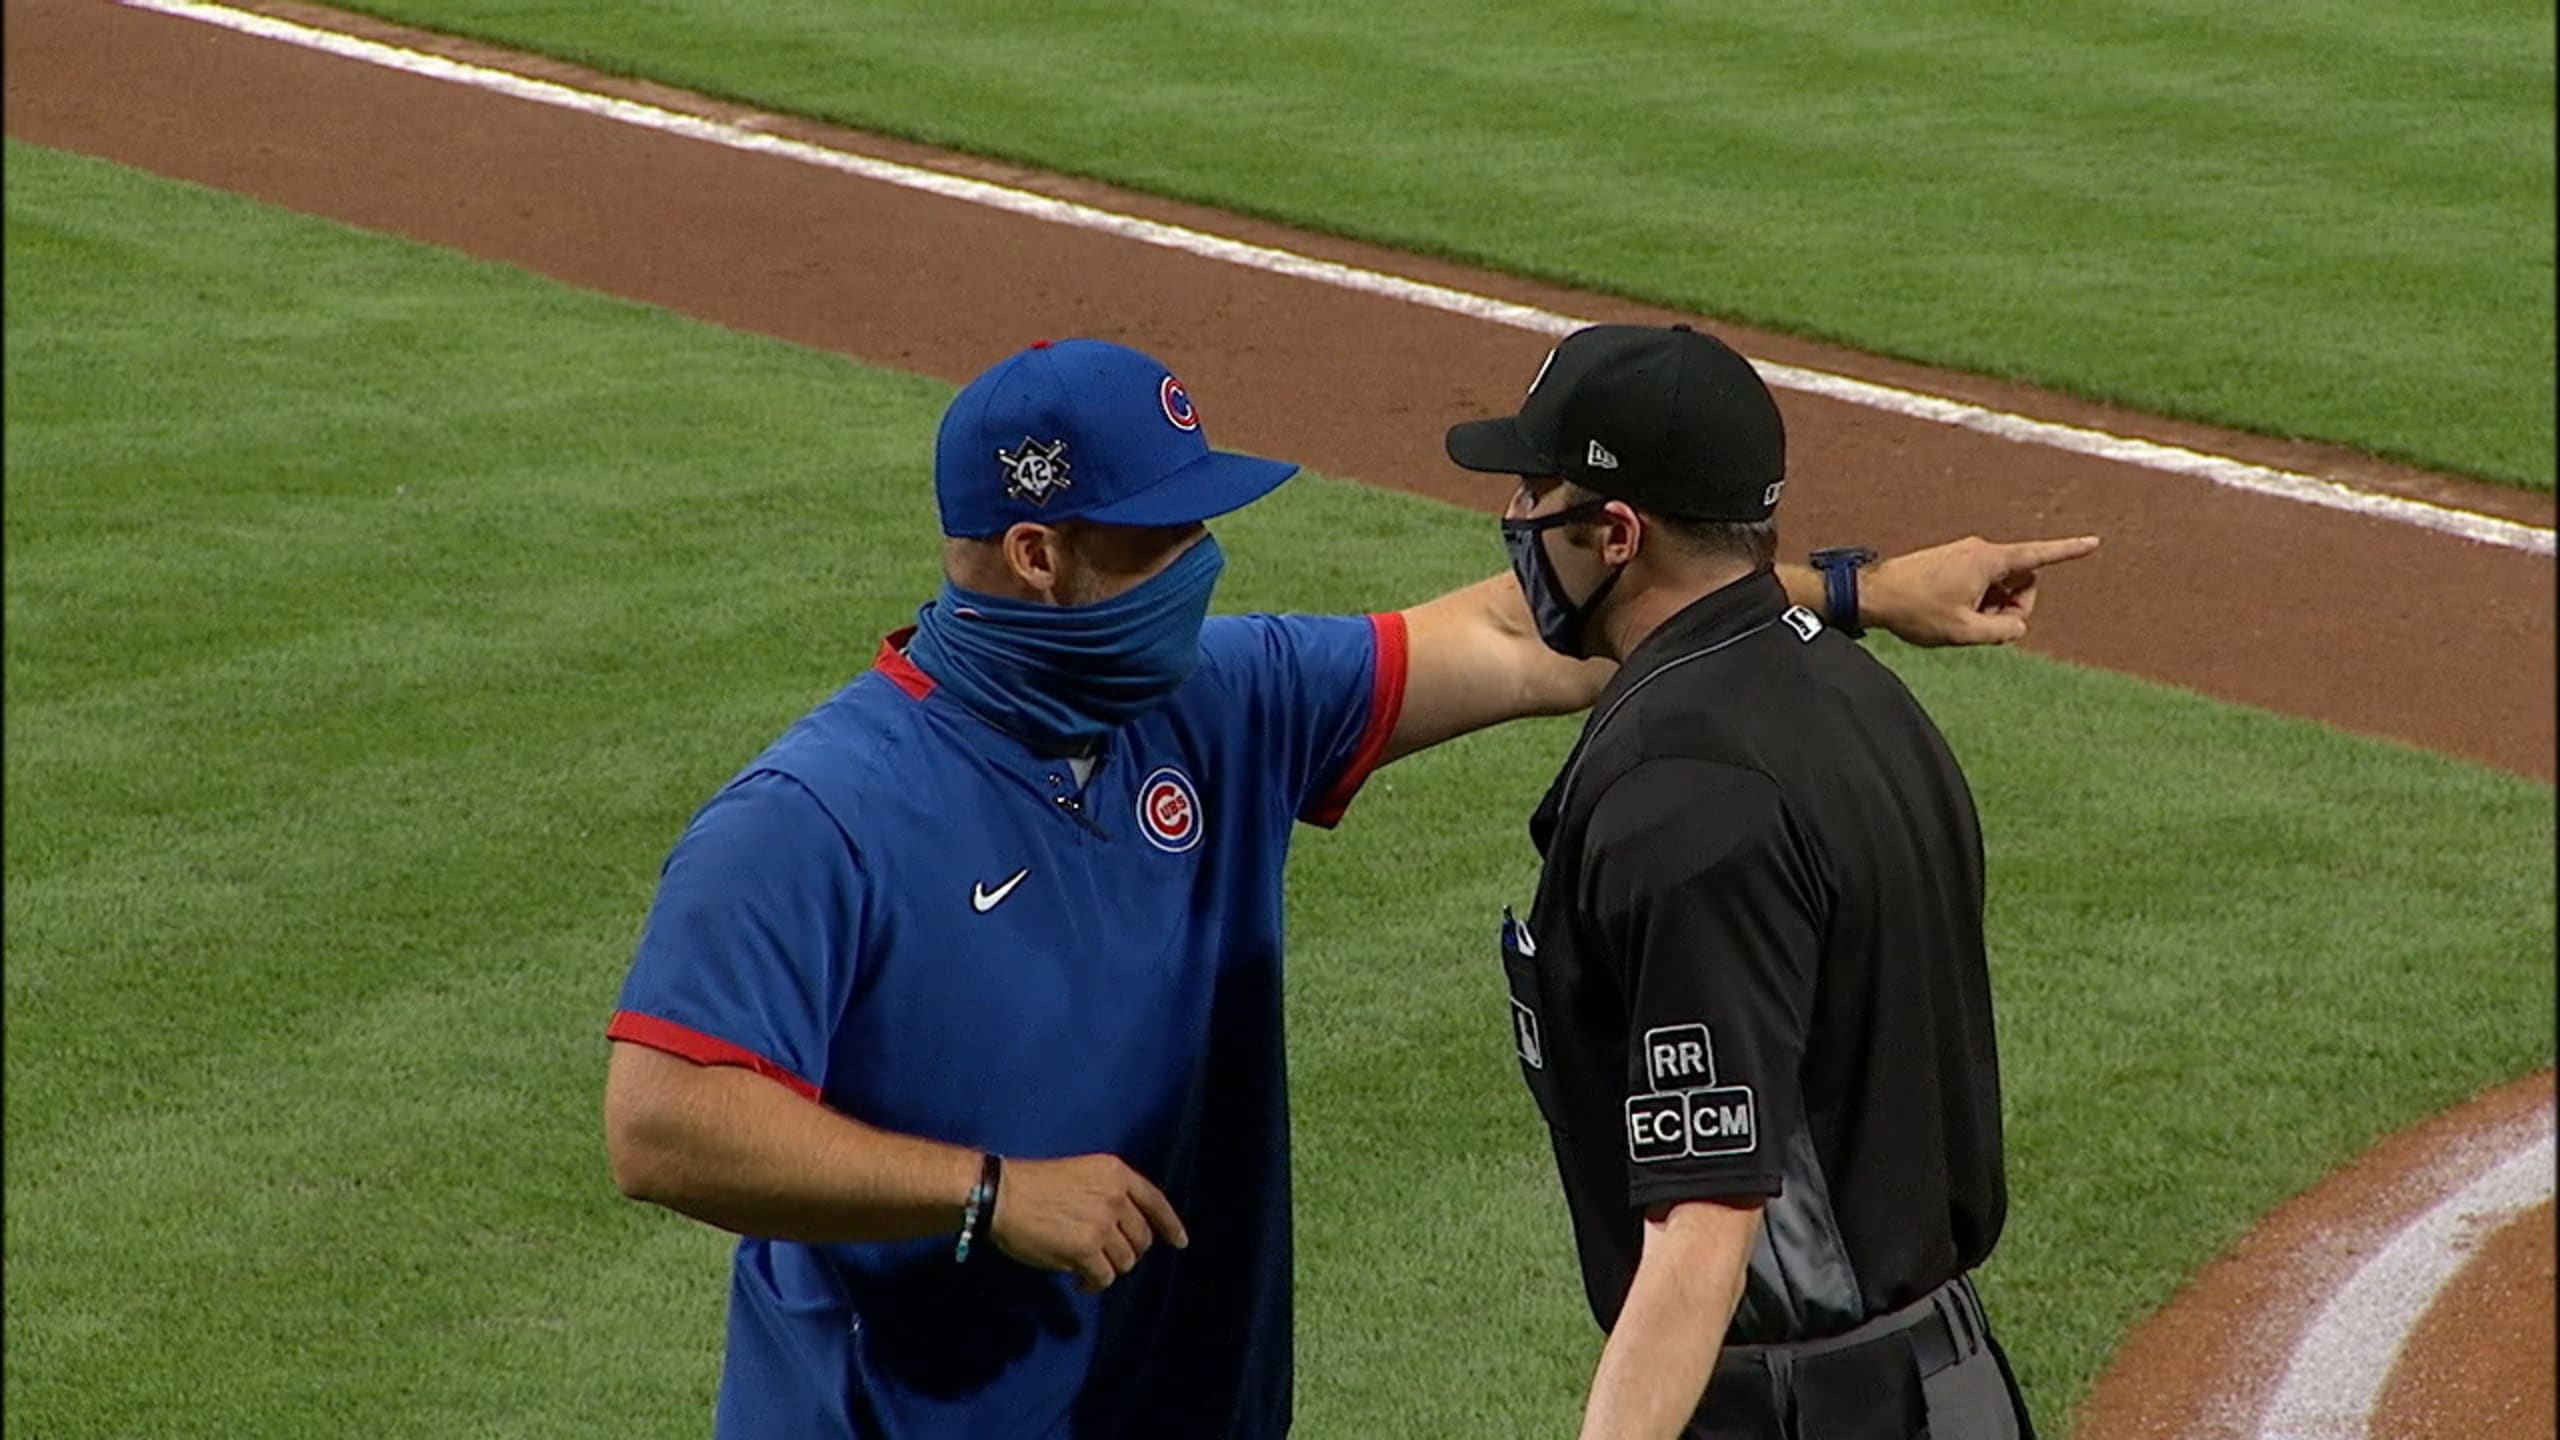 Cubs, Reds involved in brief bench-clearing incident - ABC7 Chicago